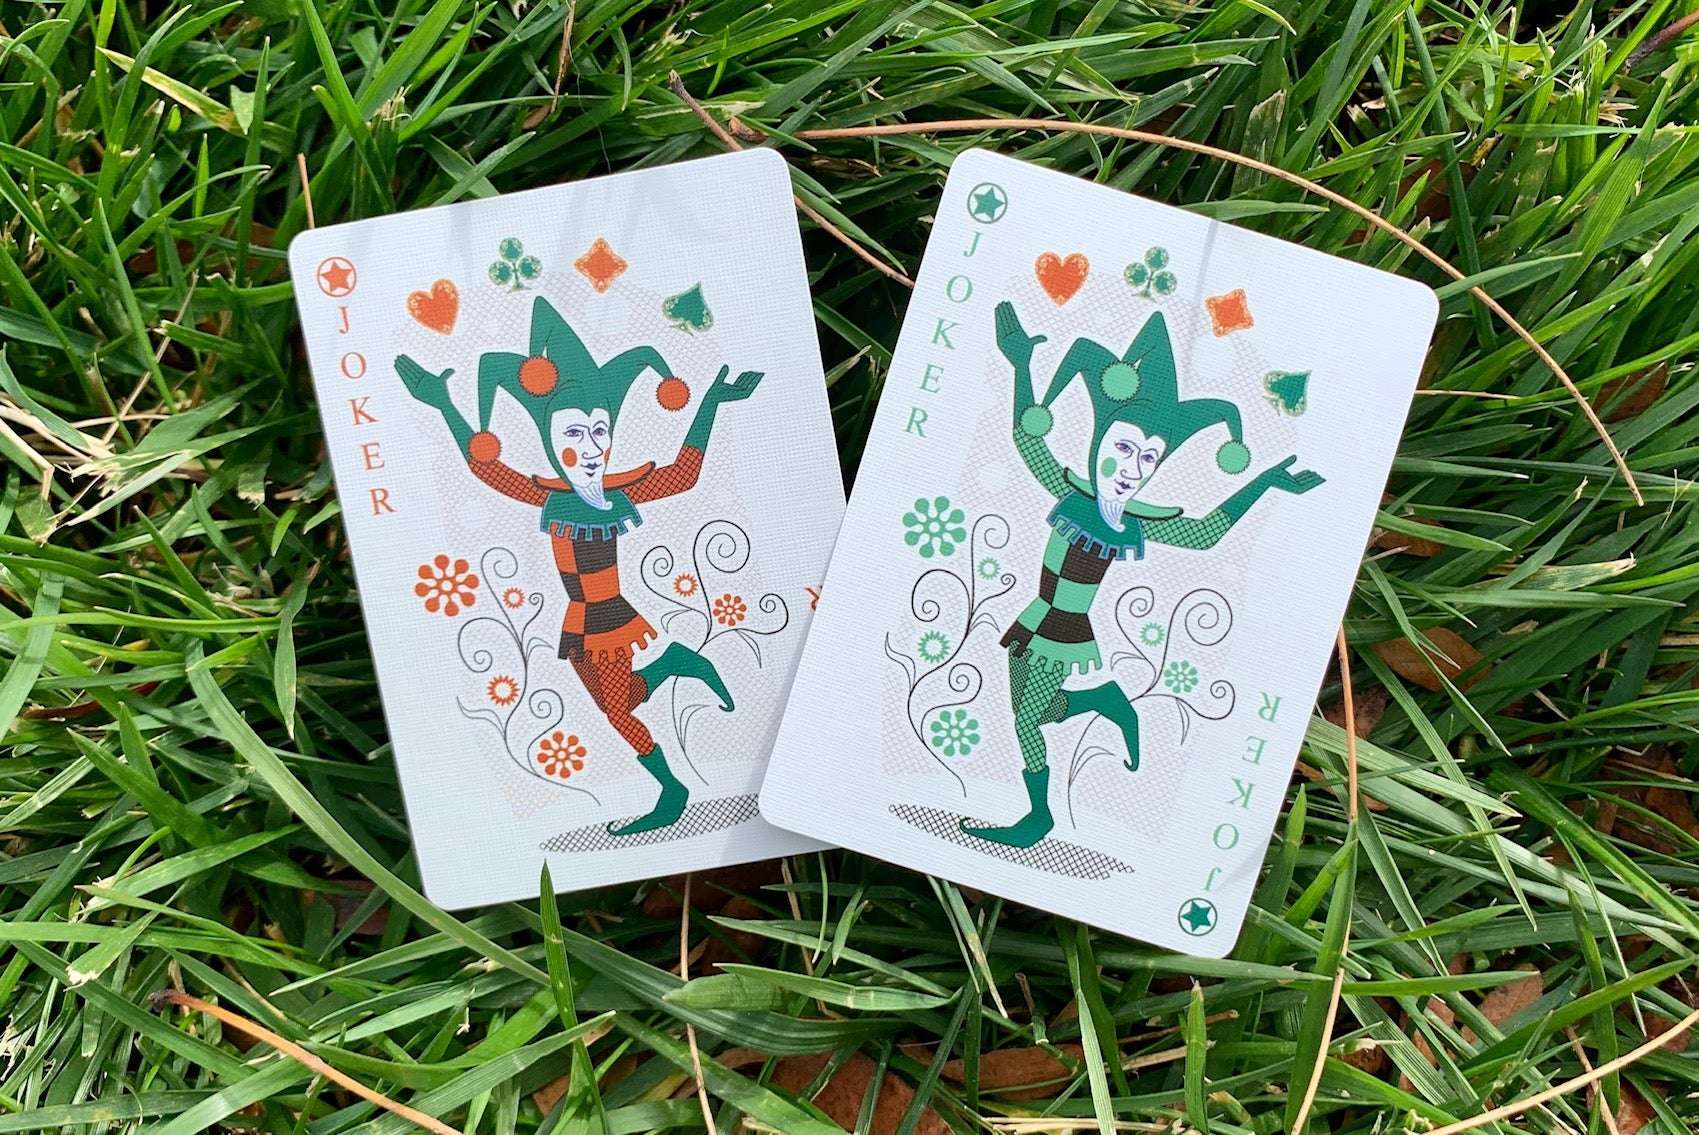 PlayingCardDecks.com-Grasshopper Gilded Bicycle Playing Cards